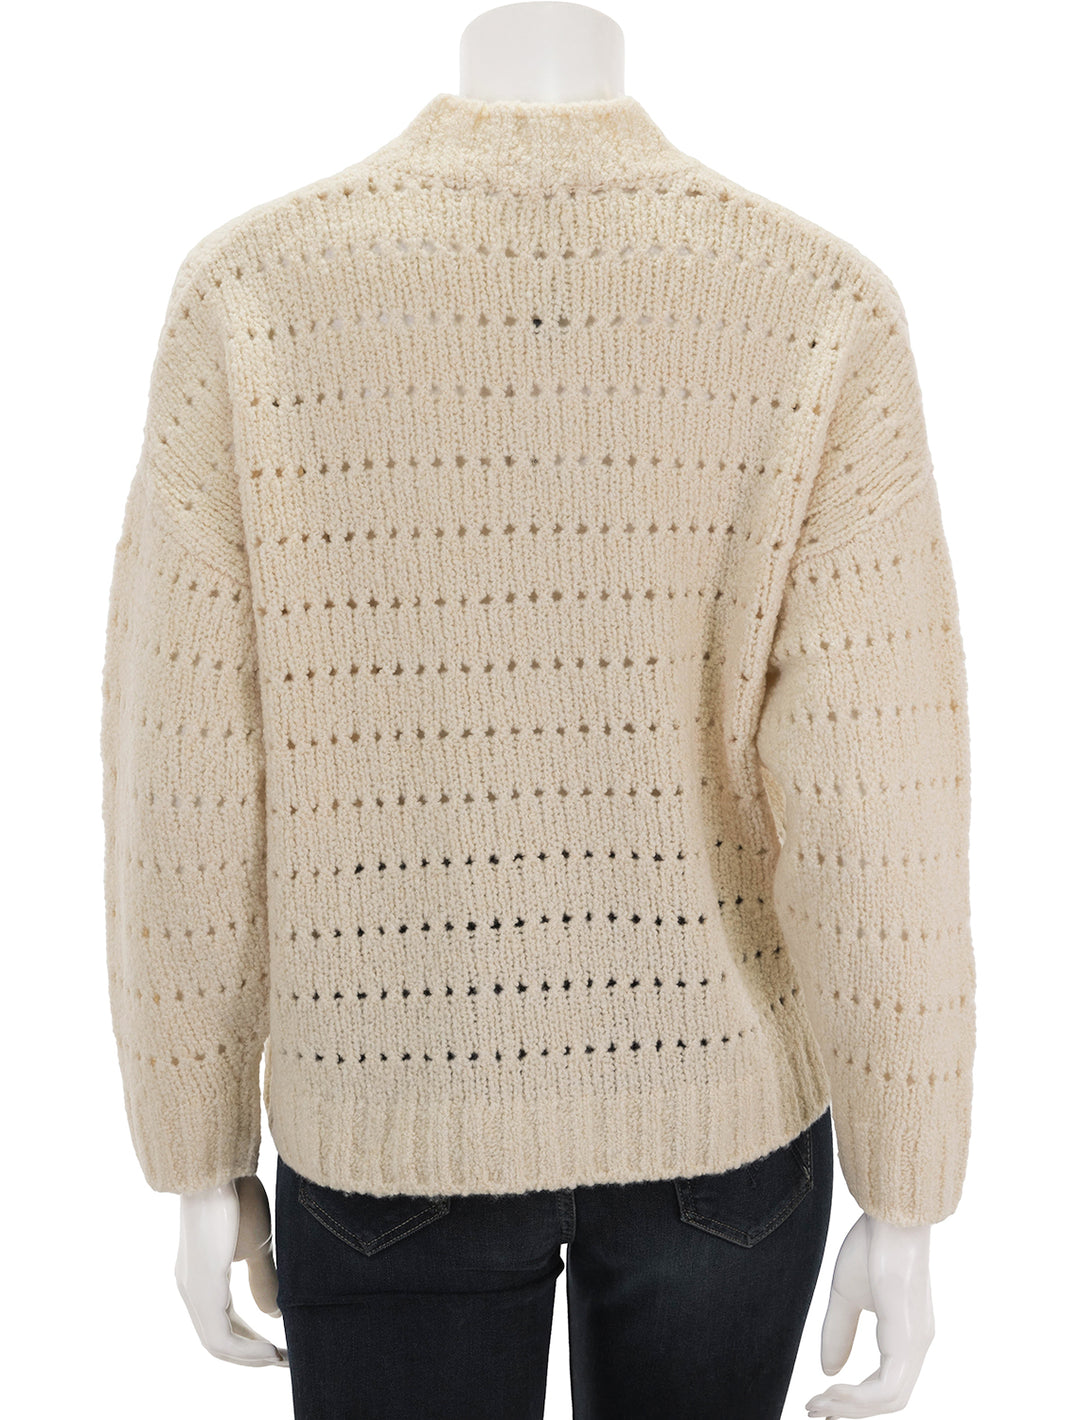 Back view of Sundays NYC's kian cardigan in clotted cream.